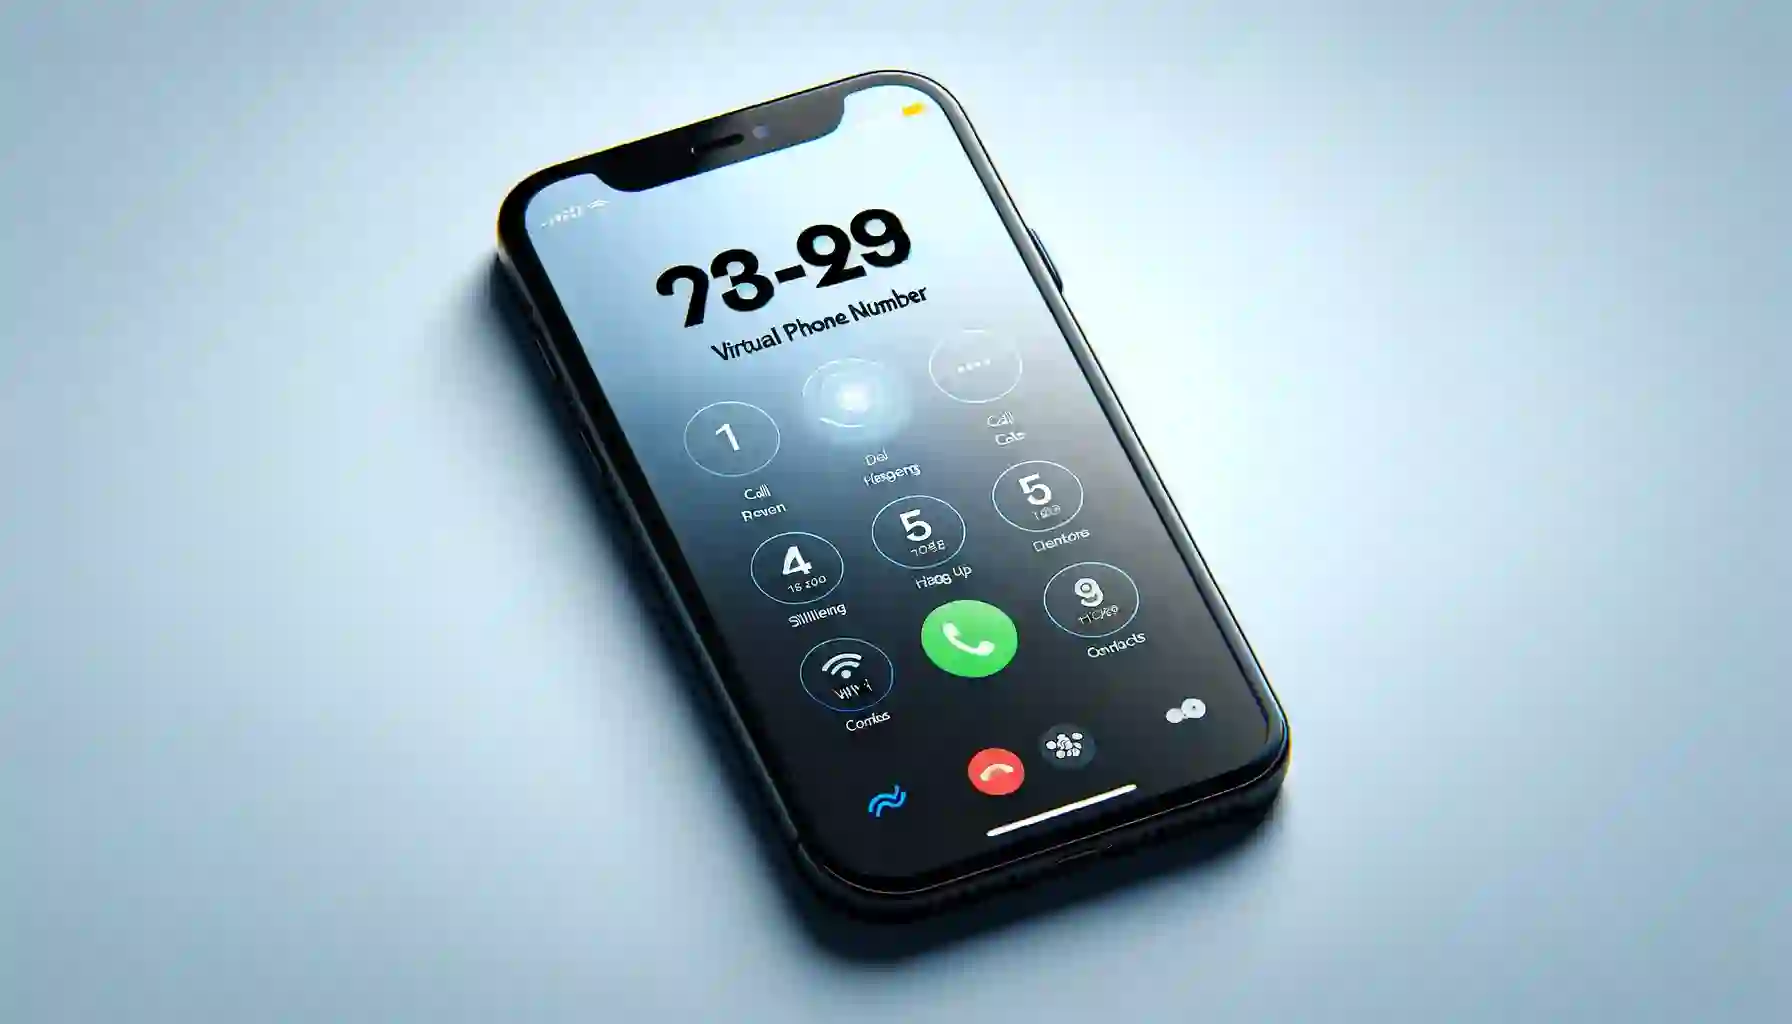 virtual phone number app for iPhone